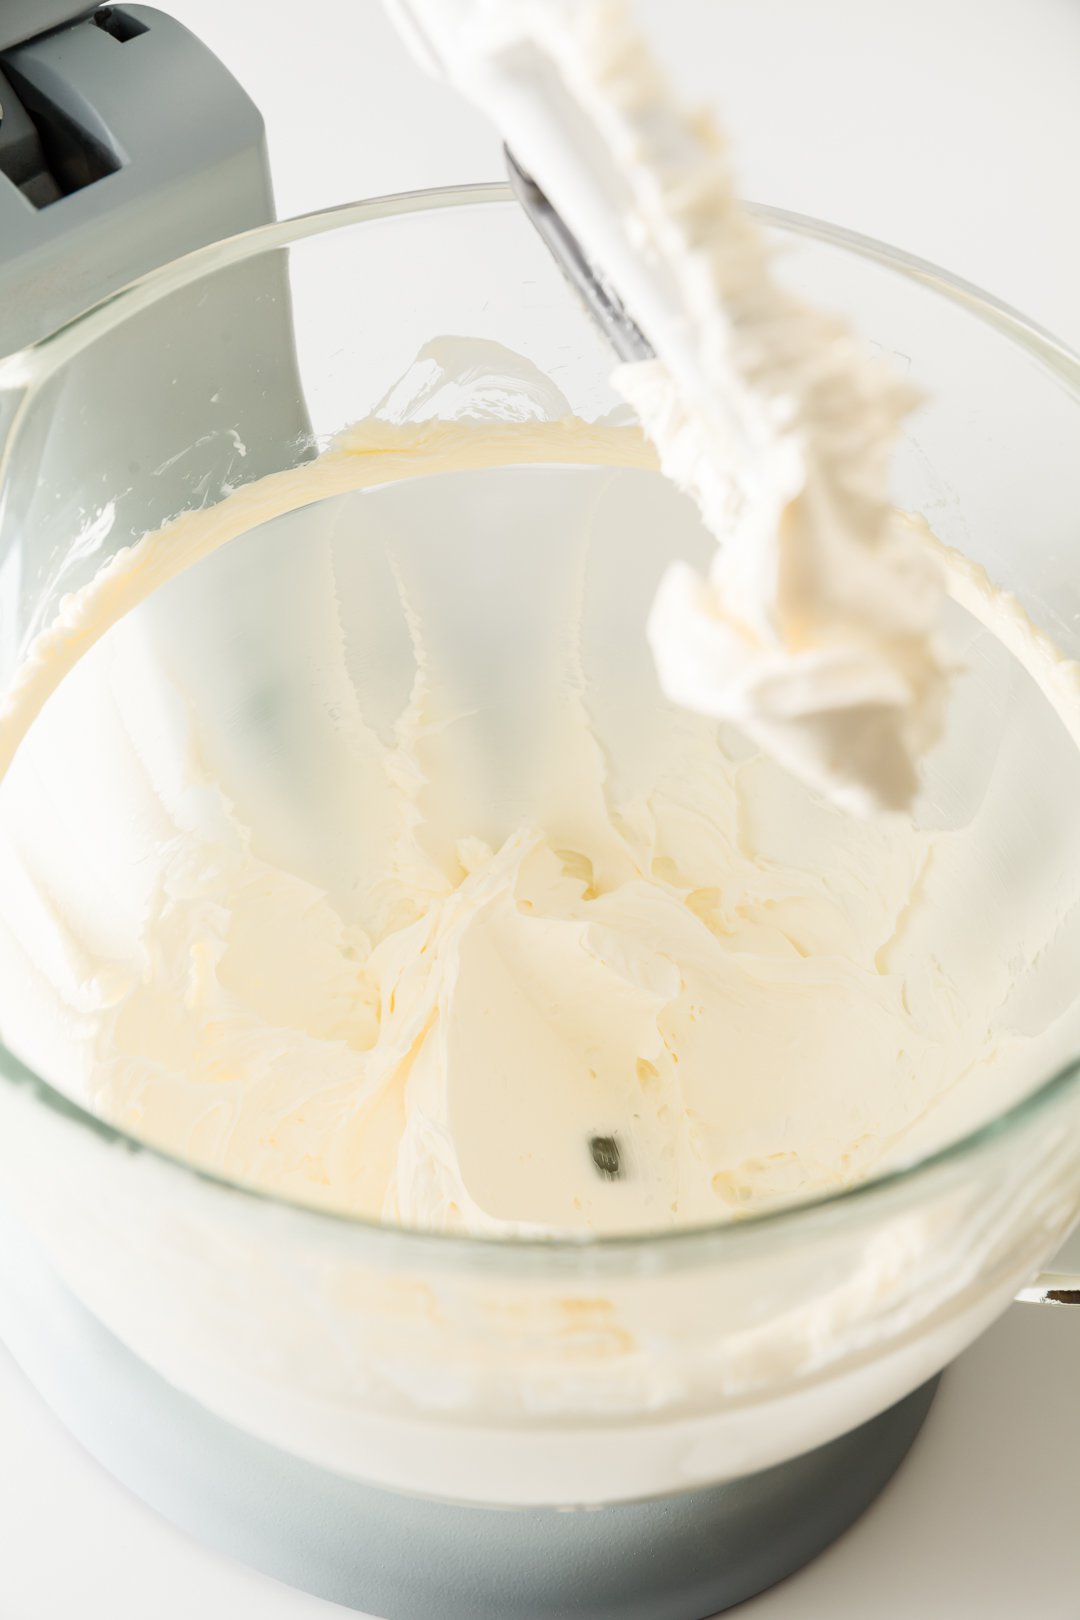 Butter mixed in stand mixer